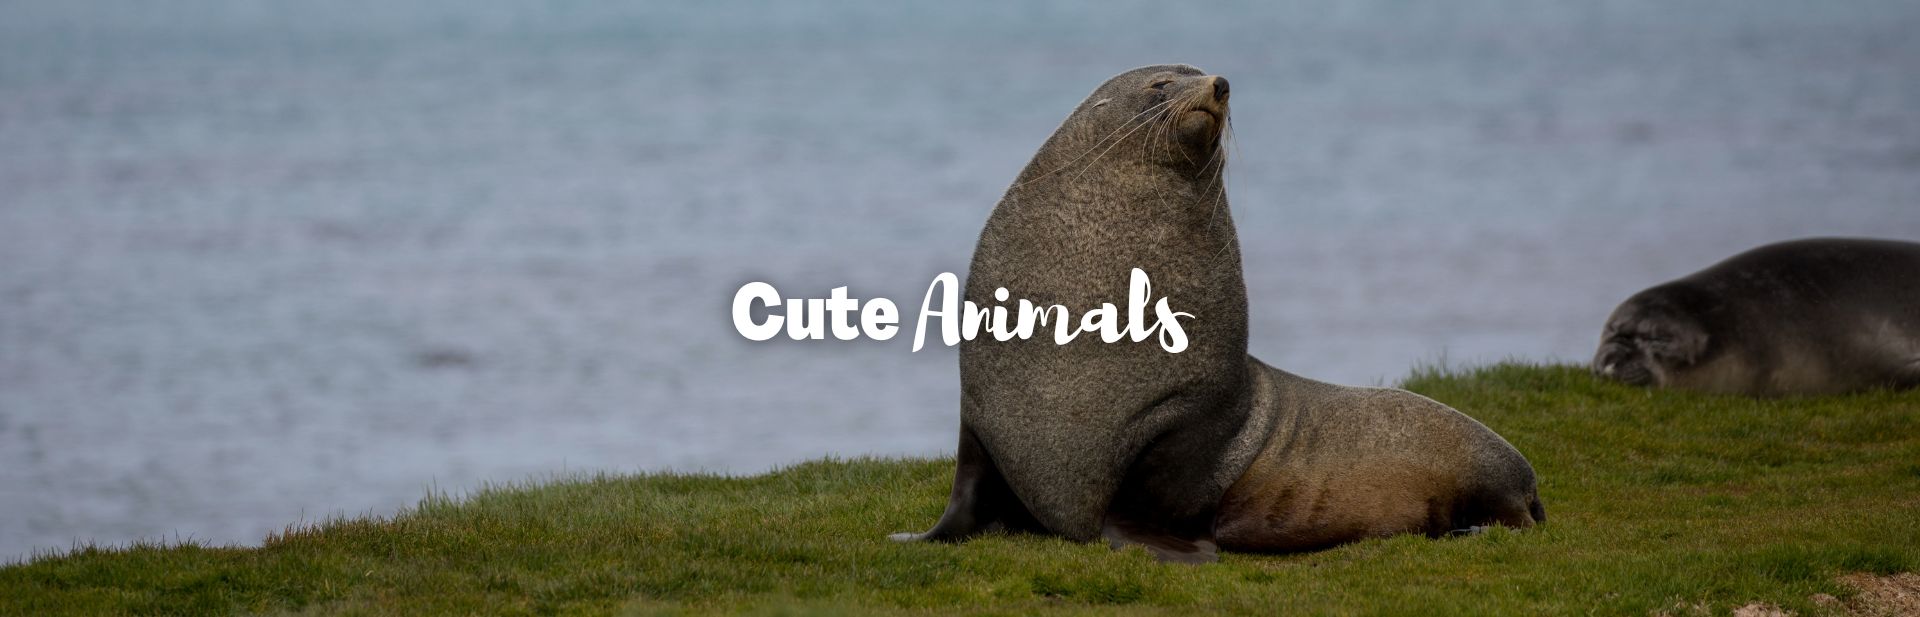 A World of Cuteness: 55 Cute Animals That’ll Make You Smile